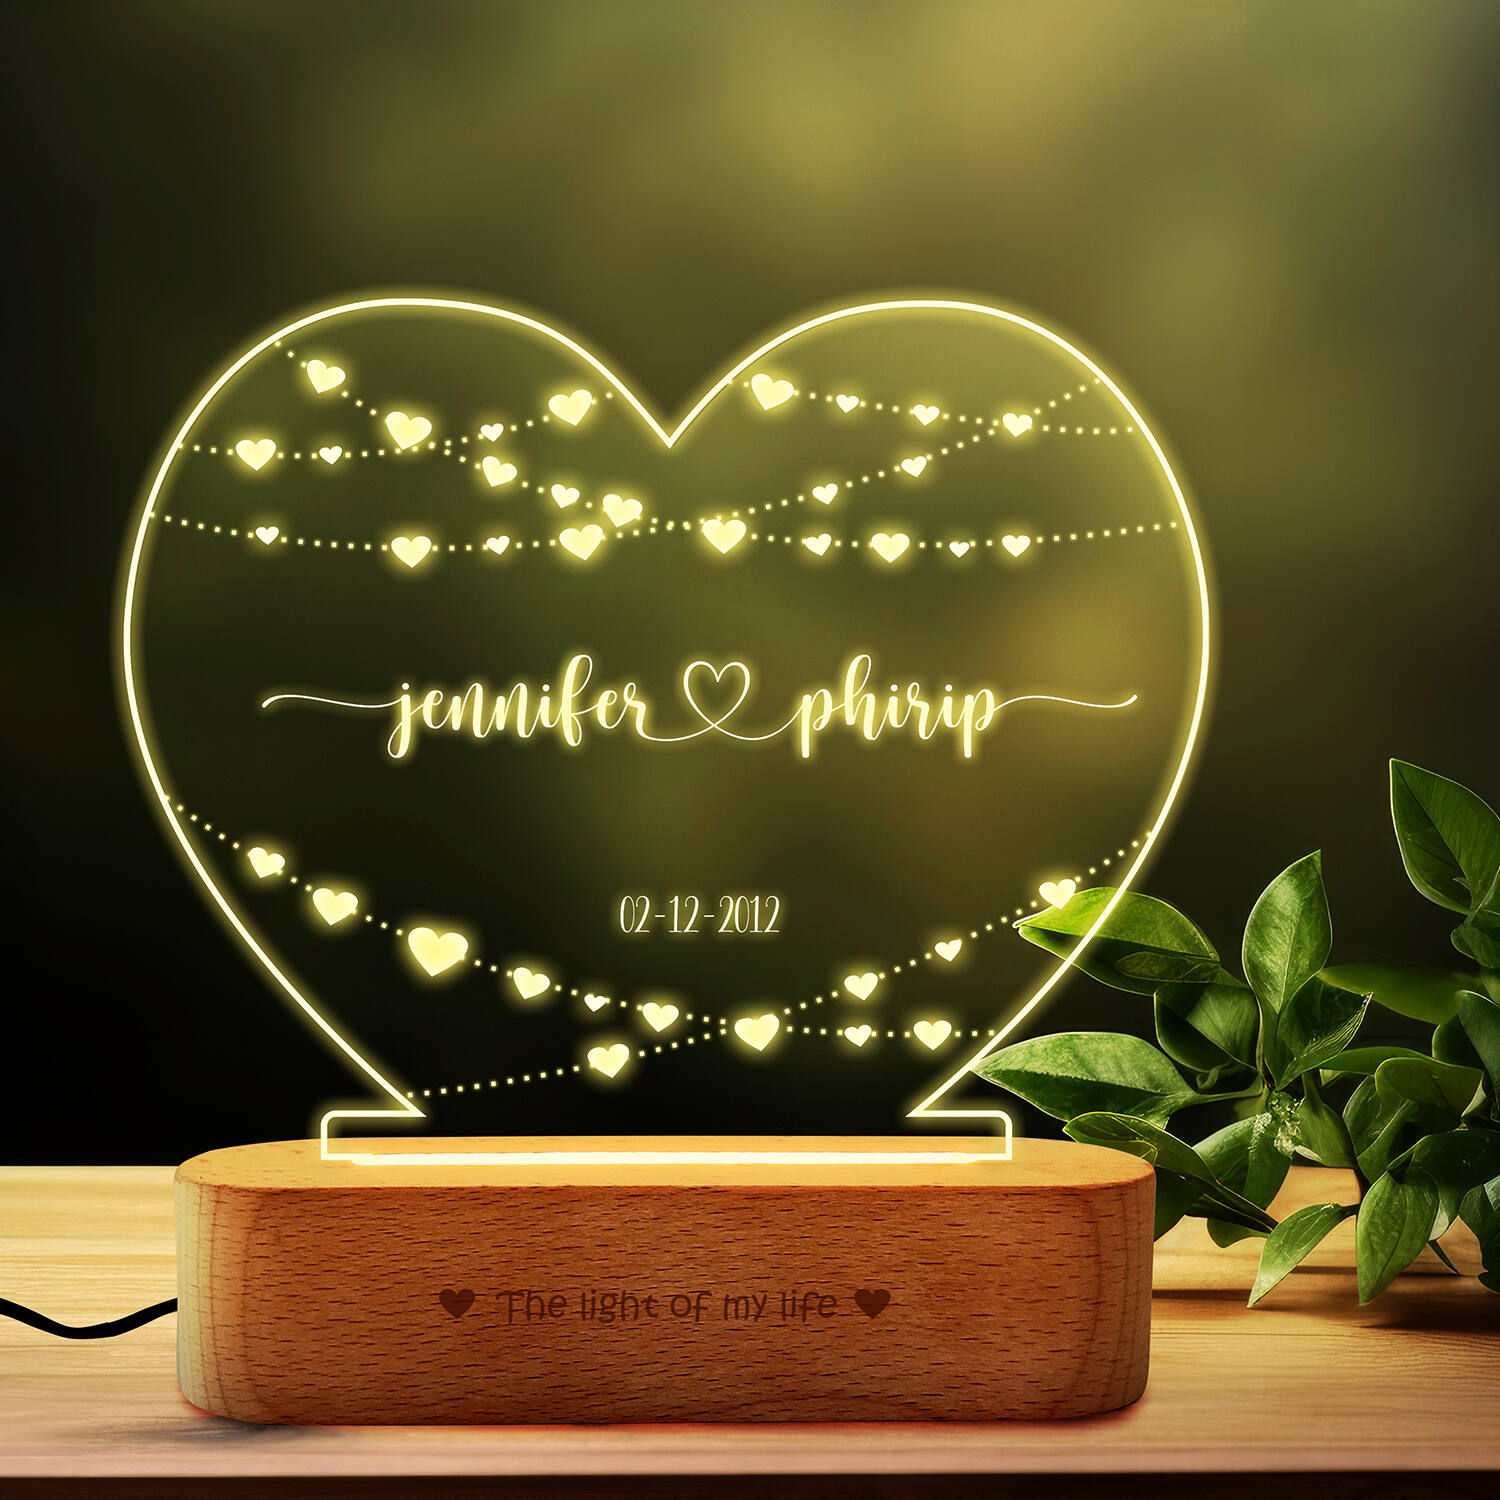 ALBK Valentines Day Gifts for Him Her - Personalized Night Lights with  Picture 3D Illusion Lamp Heart Ballon, Custom Photo Gifts for Girlfriend  Wife, Gifts for Valentines Day Anniversary for Couples -